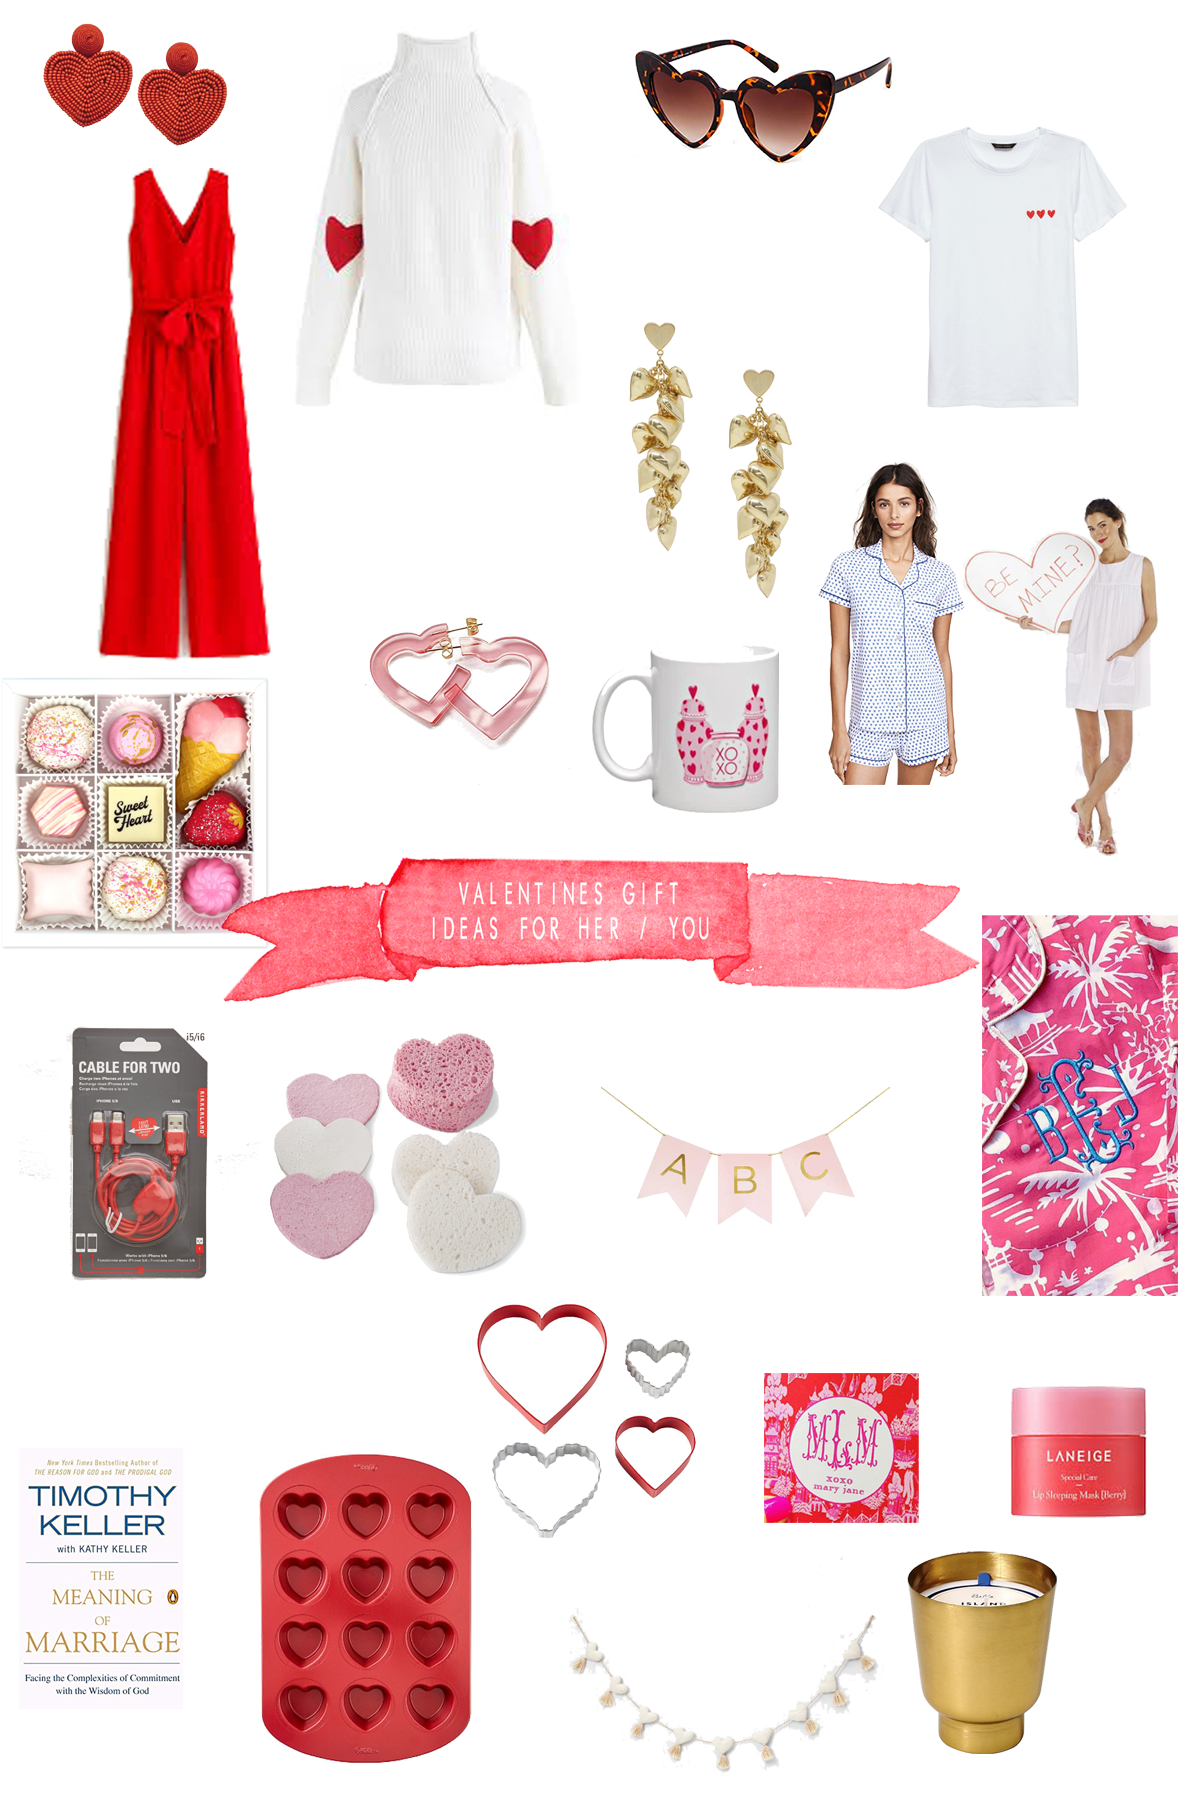 valentine's gift guide for her / you